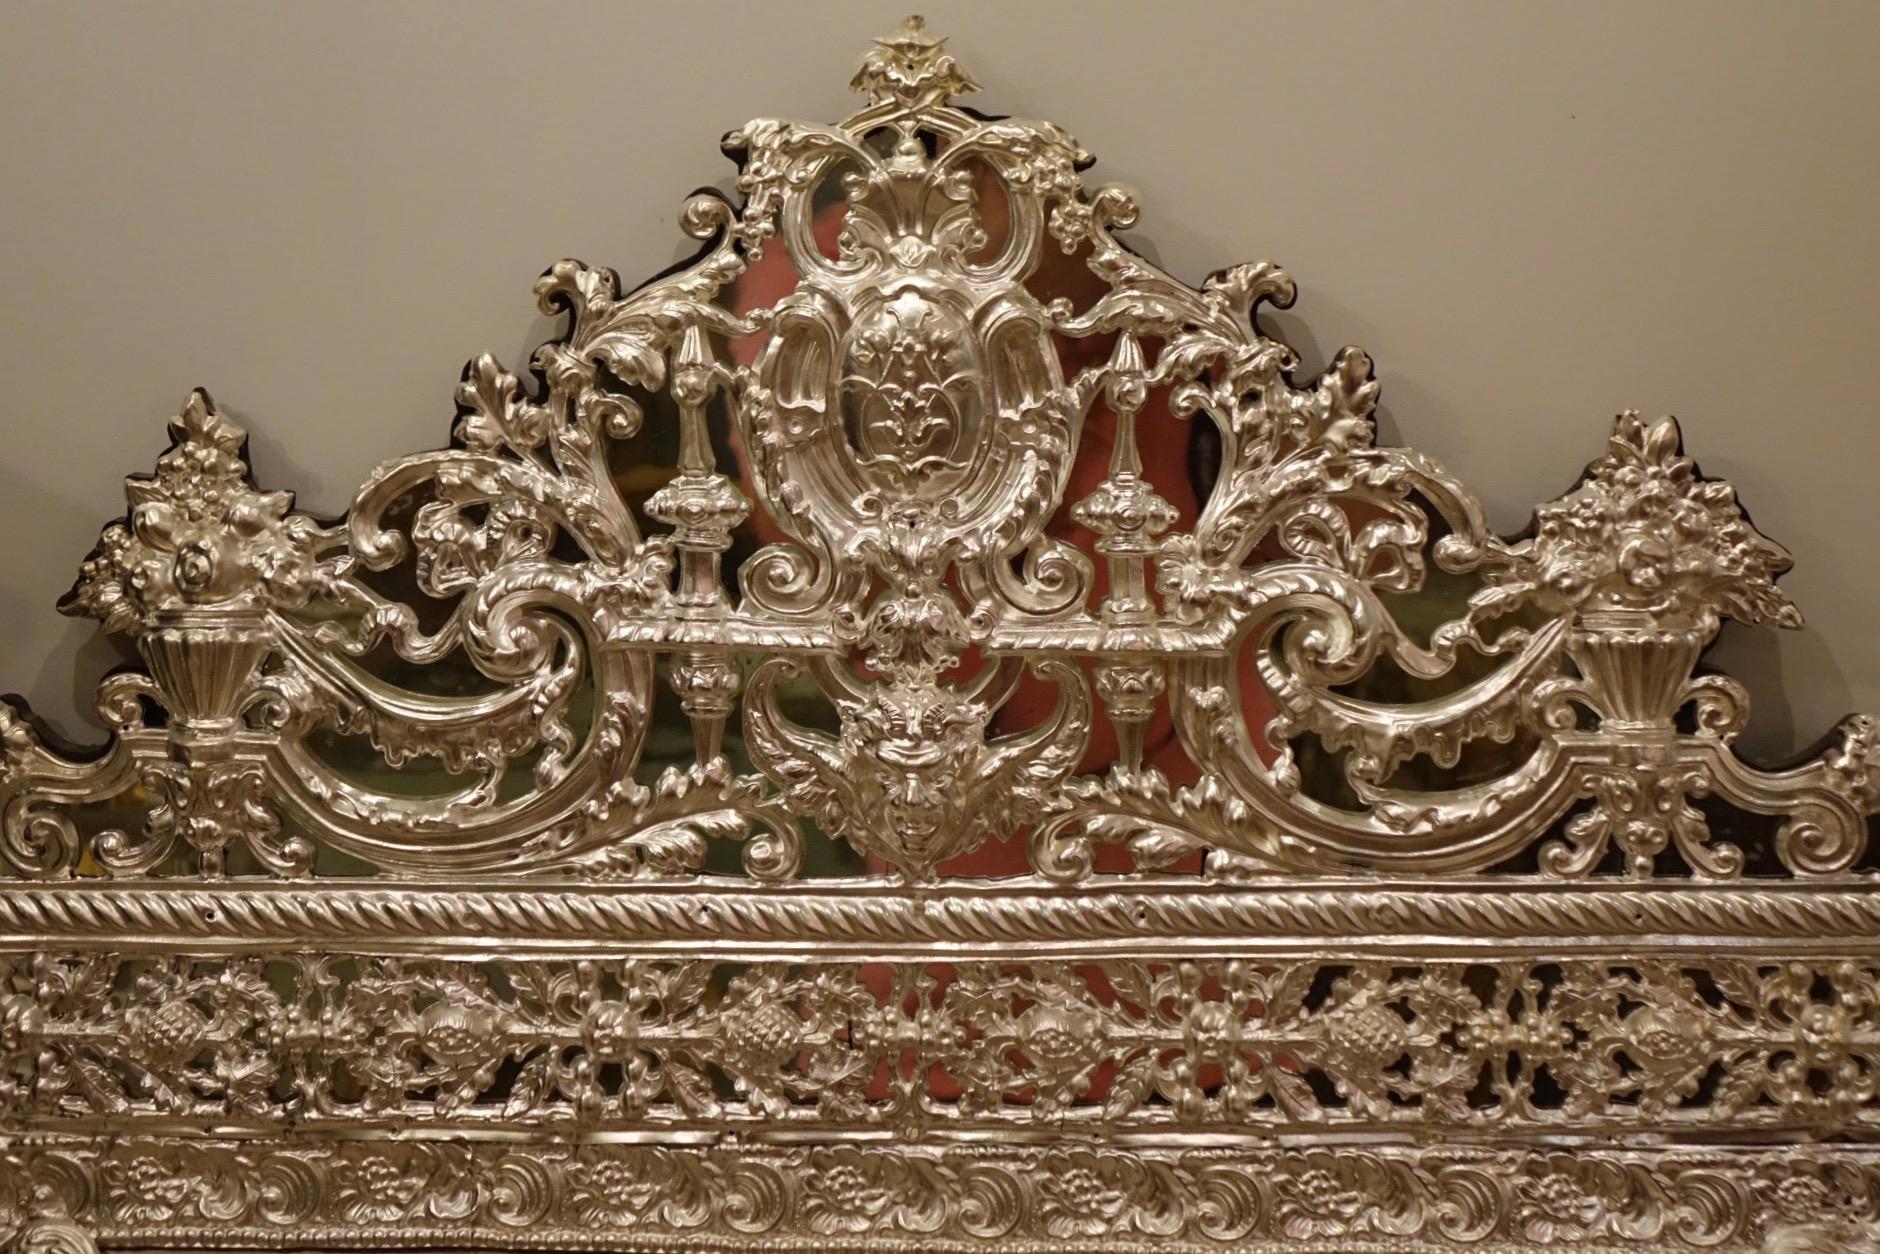 Mirror in Louis XIV style in embossed silver plated brass, France, 19th century.
French Second Empire period.
The central mirror, the parclose mirrors on the sides, and the pediment have beveled edges.
Decorated with scrolls, volutes,